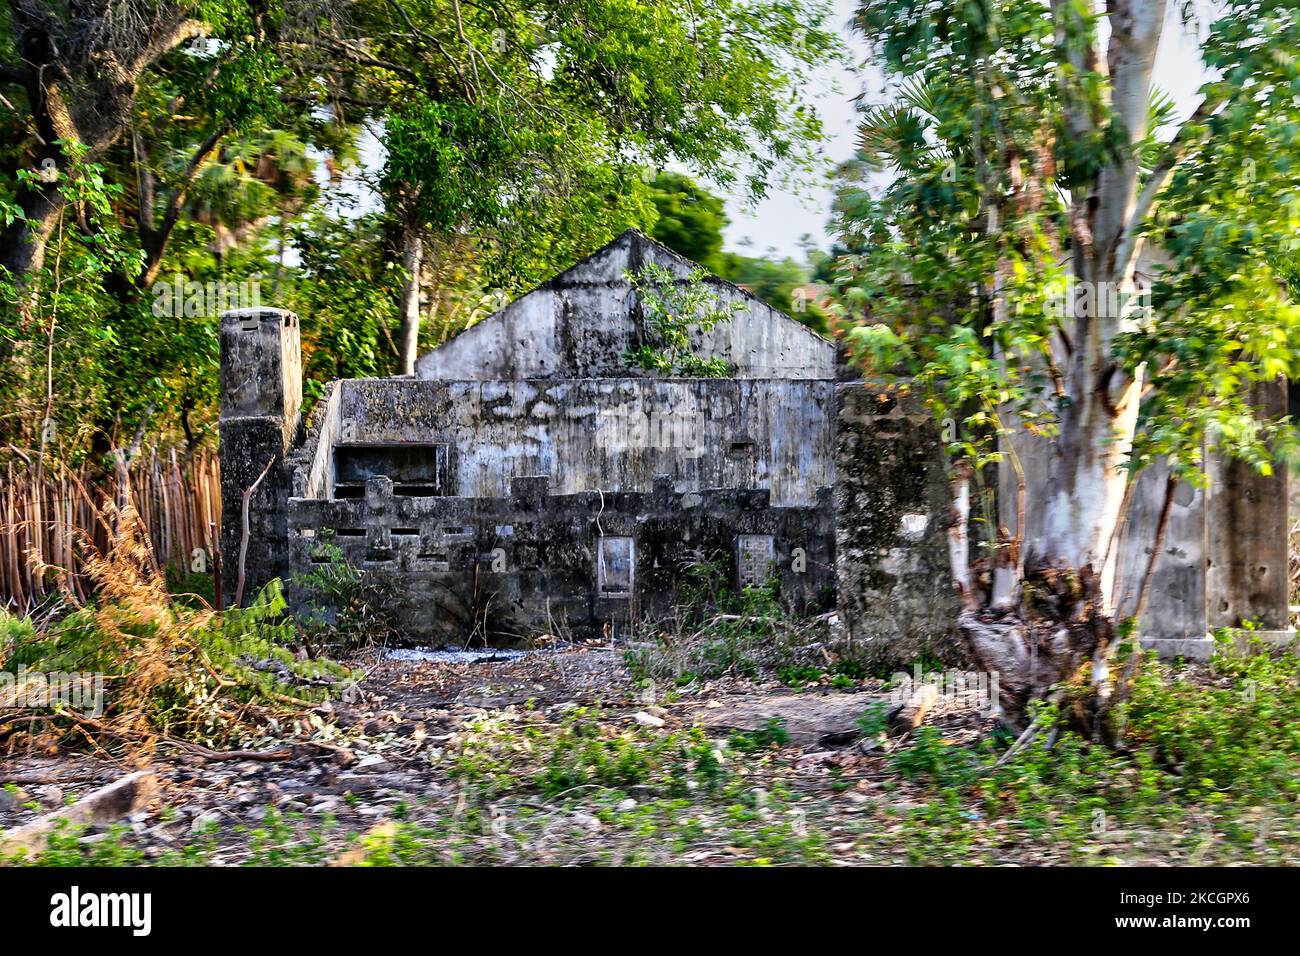 Remains of a home destroyed during the civil war in Kayts, Jaffna, Sri Lanka. Kayts is one of the villages in Velanai Island which is a small island off the coast of the Jaffna Peninsula in northern Sri Lanka. Kayts Island has also been the scene of violence as part of the Sri Lankan Civil War, including the Allaipiddy massacre. This is just one of the many reminders of the deep scars caused during the 26-year long civil war between the Sri Lankan Army and the LTTE (Liberation Tigers of Tamil Eelam). The United Nations estimates about 40,000 people were killed during the war. (Photo by Creativ Stock Photo